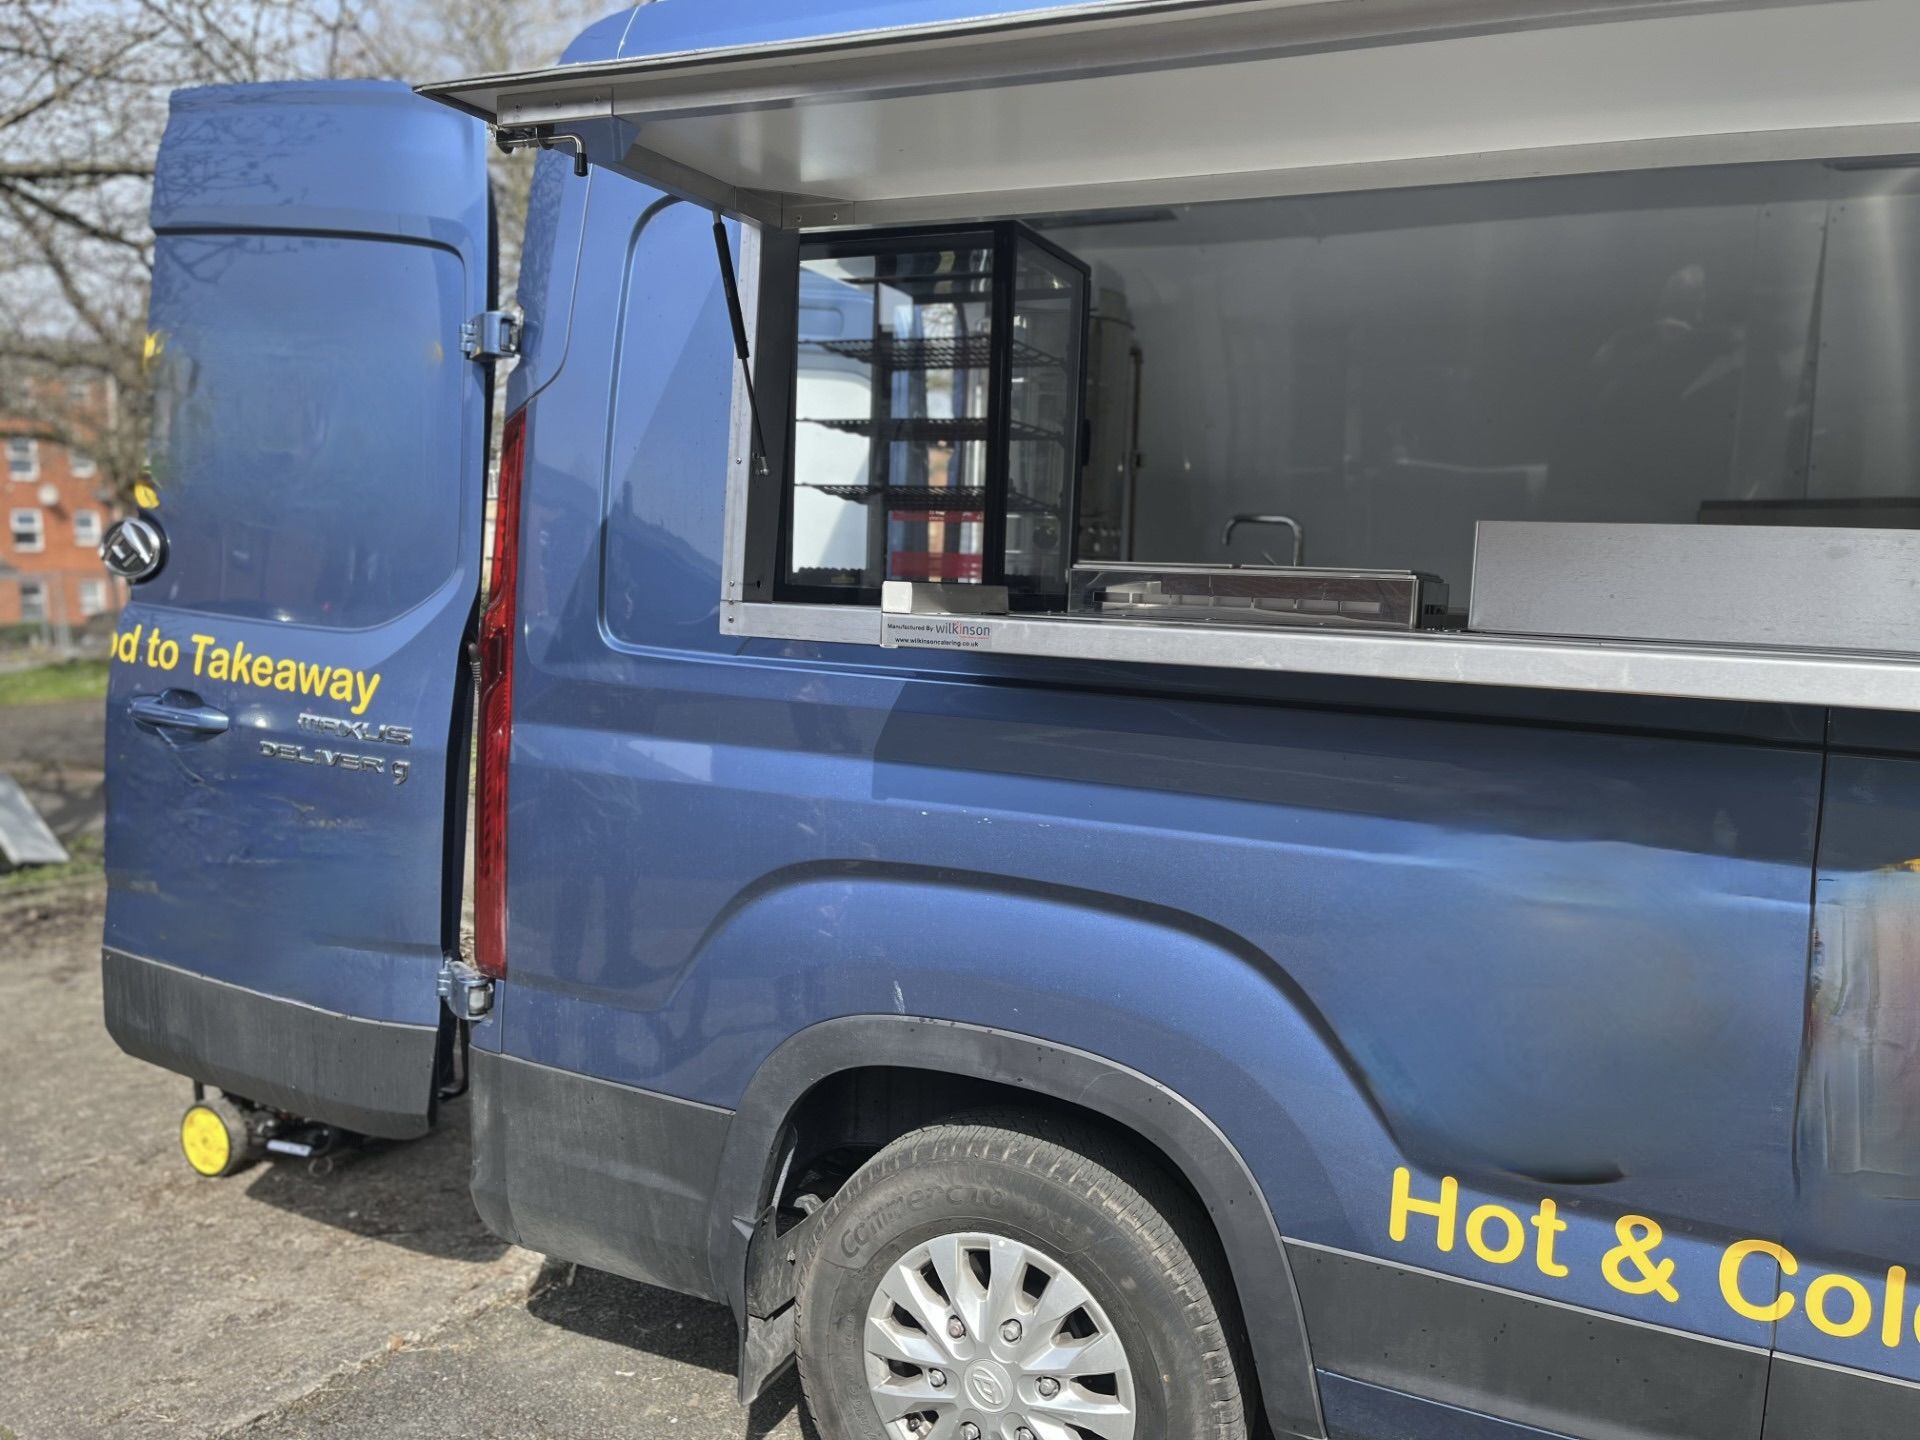 2021 MAXUS DELIVER 9 LUX - Professionally converted to Mobile Catering / Fast Food Van - Image 6 of 6